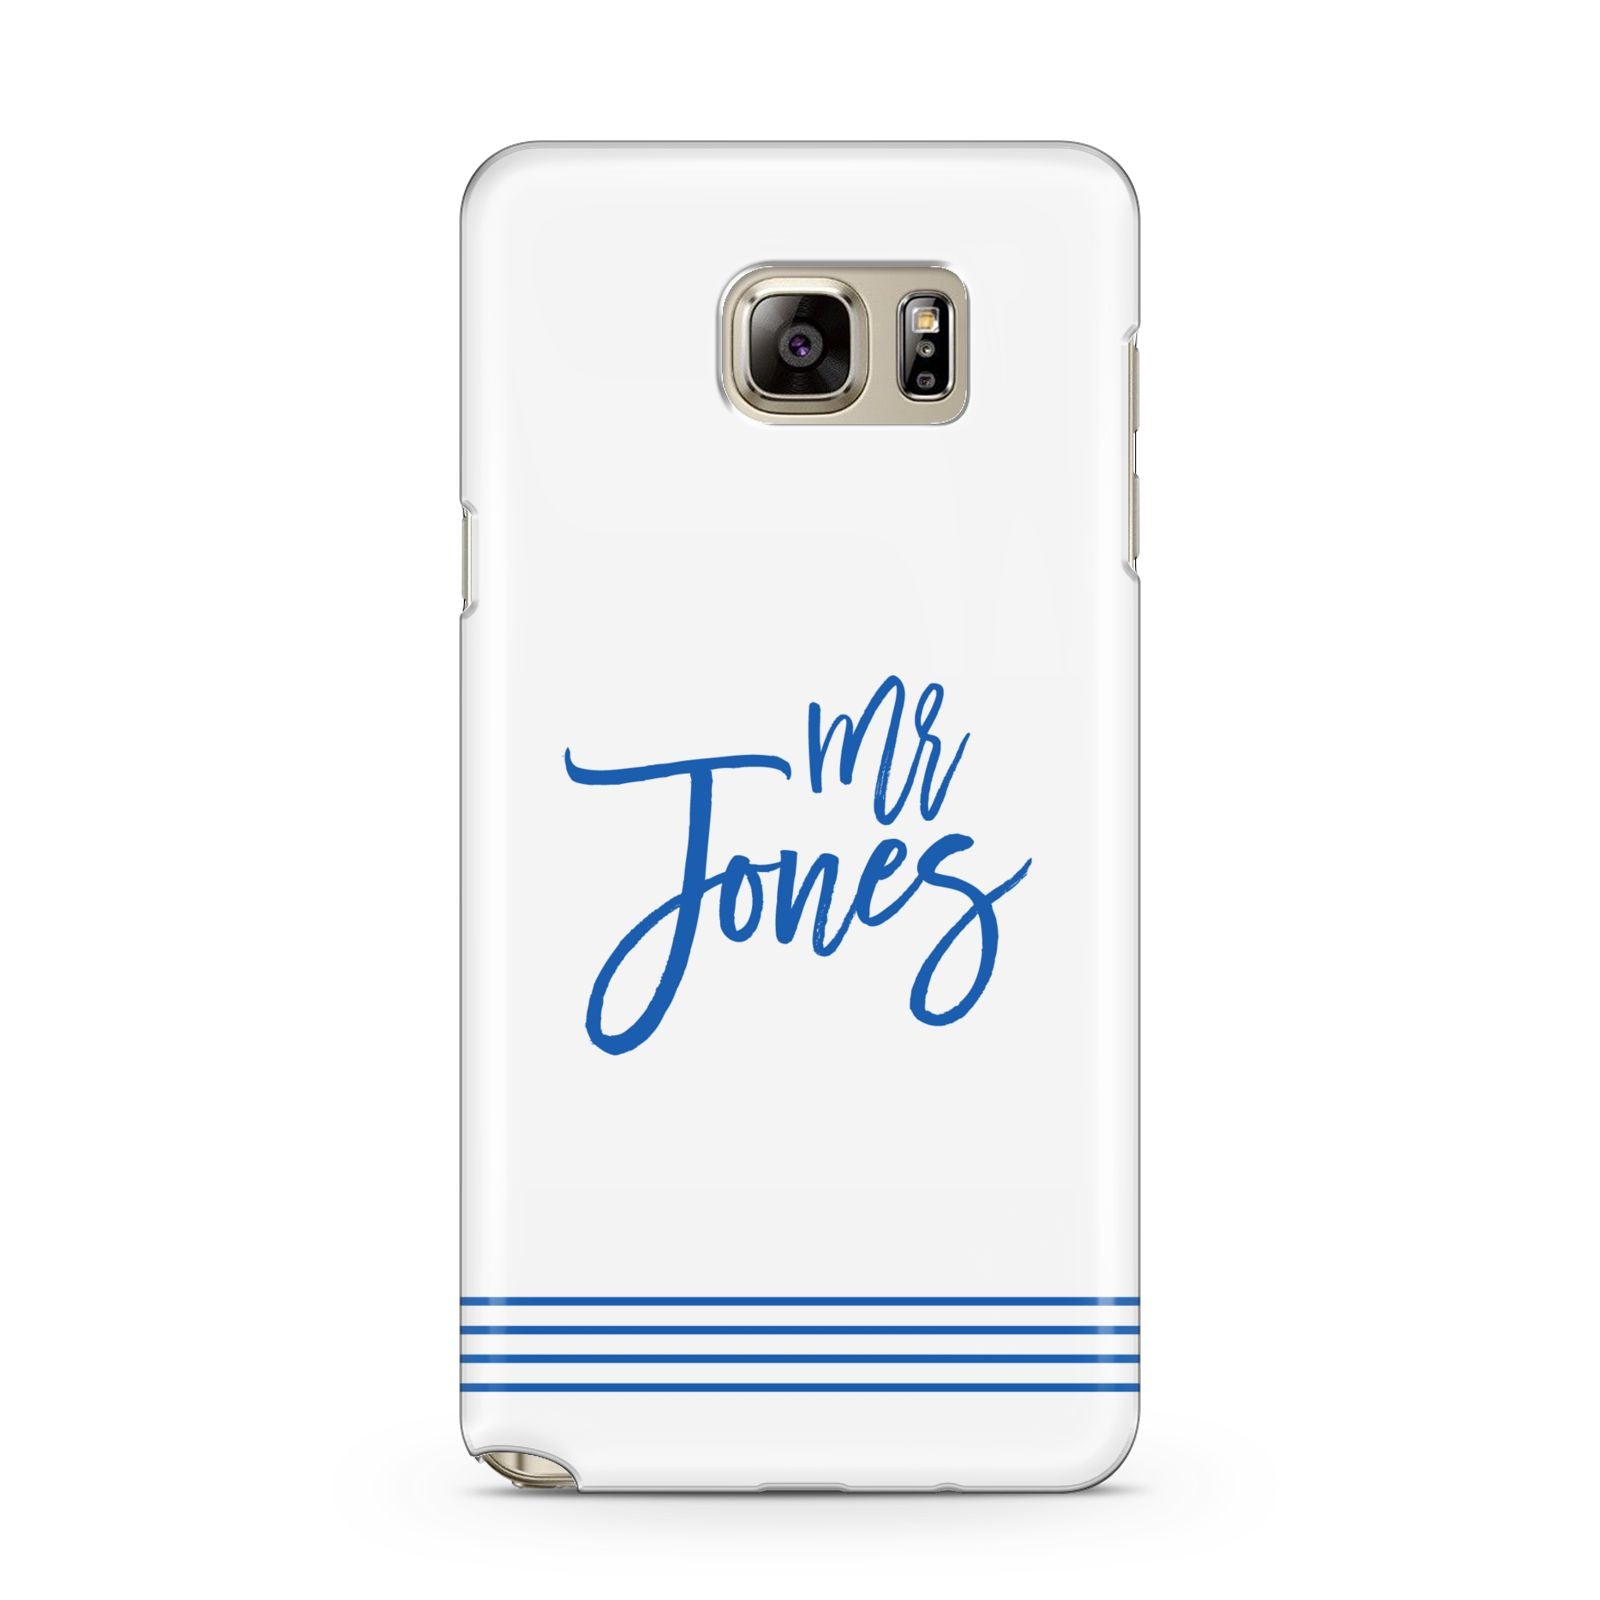 Personalised His Samsung Galaxy Note 5 Case